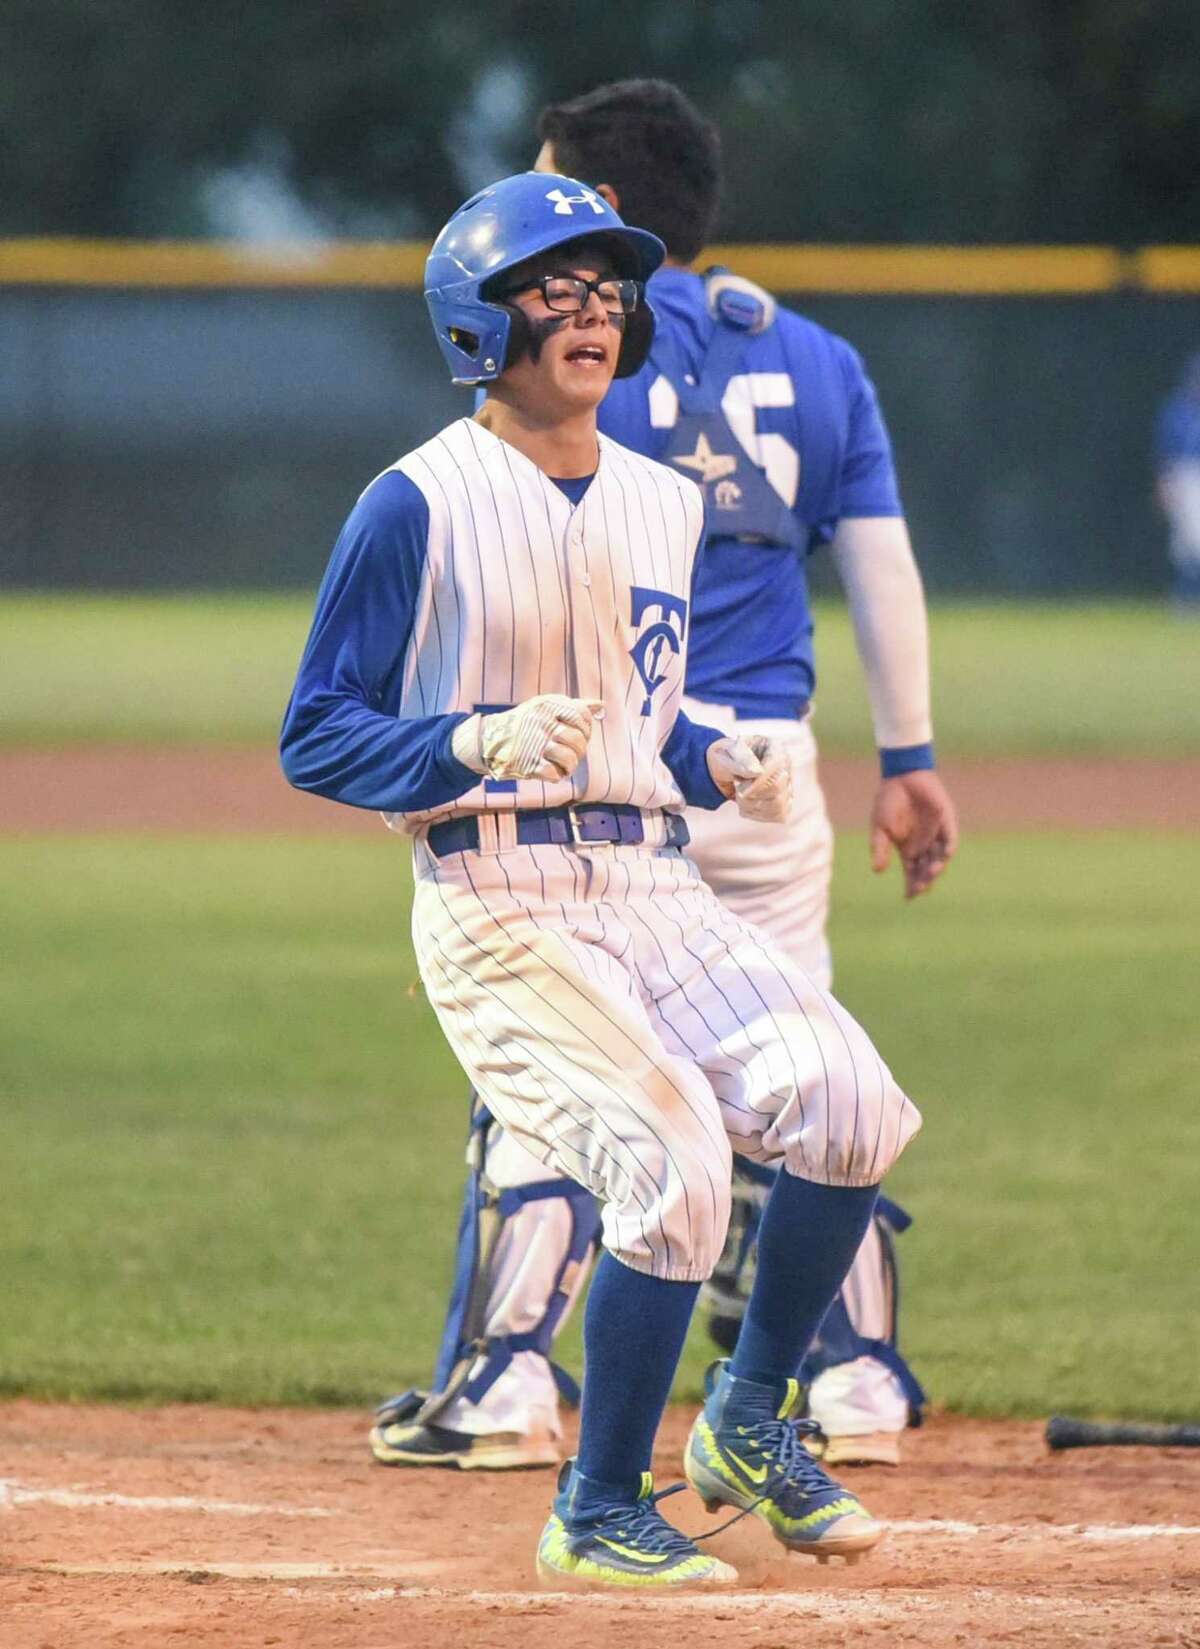 Luis Alvarez finished third on the team with a .362 batting average while also recording 25 hits, 21 steals, 20 runs 15 RBIs and 13 walks this past season.